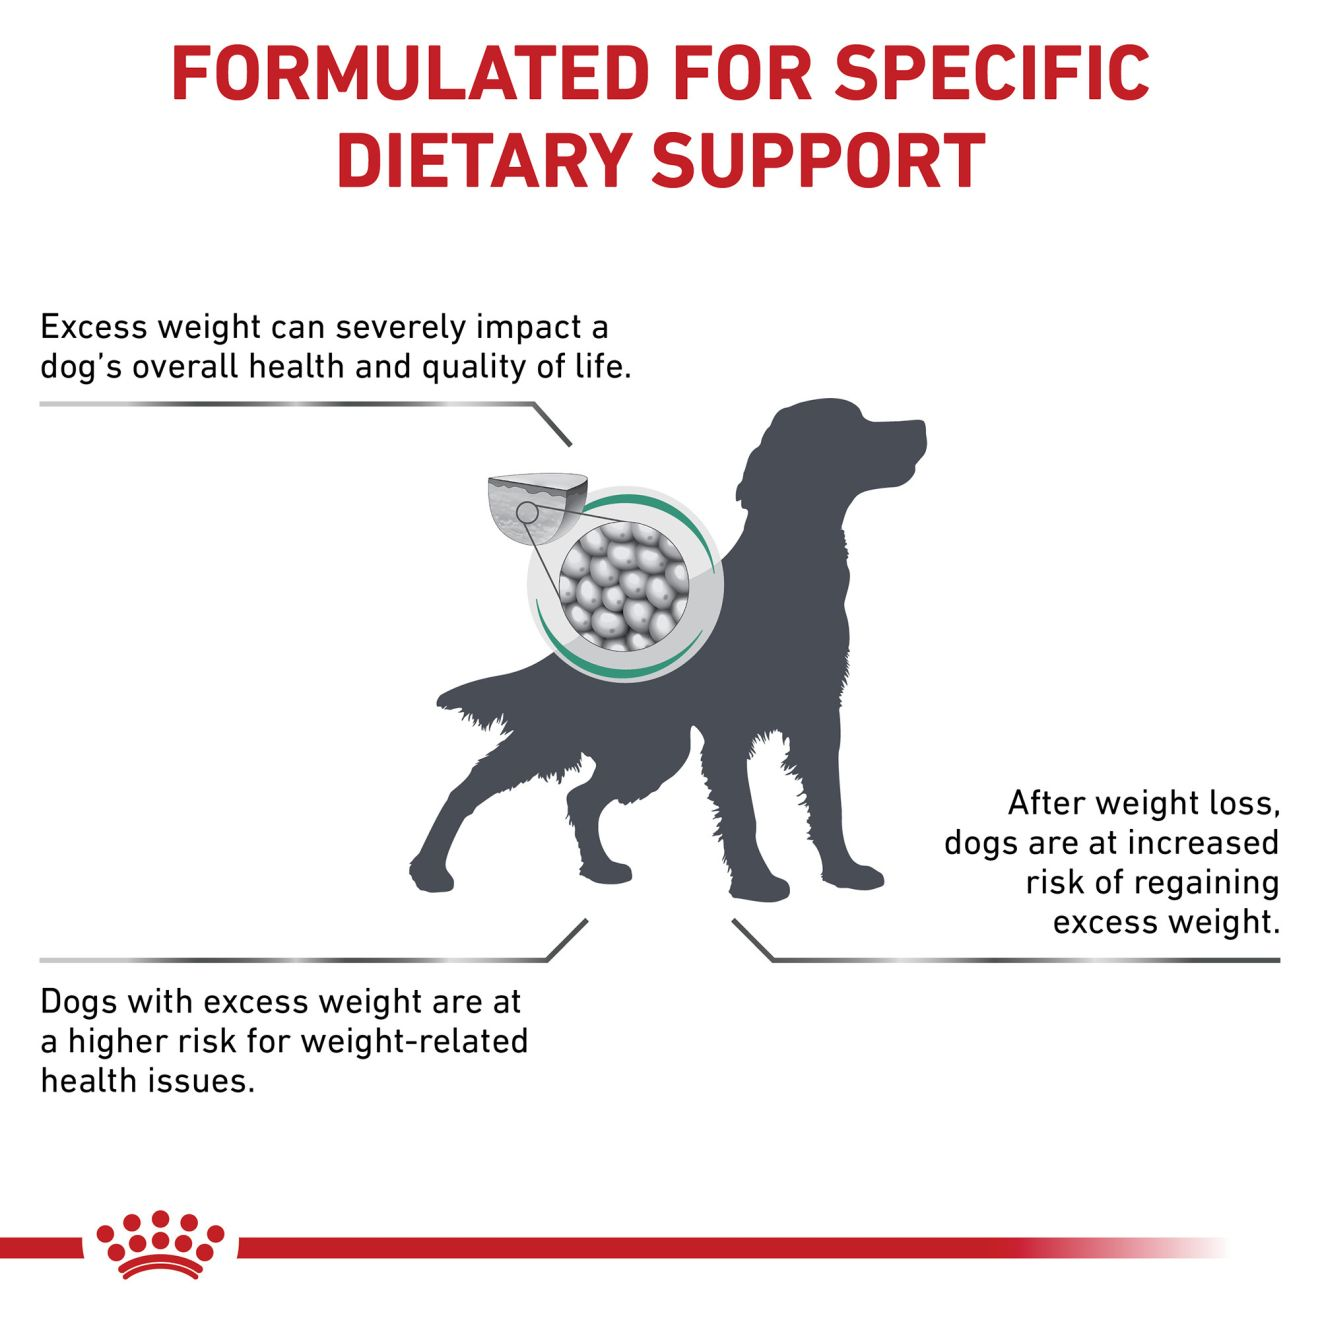 Canine Satiety® Support Weight Management